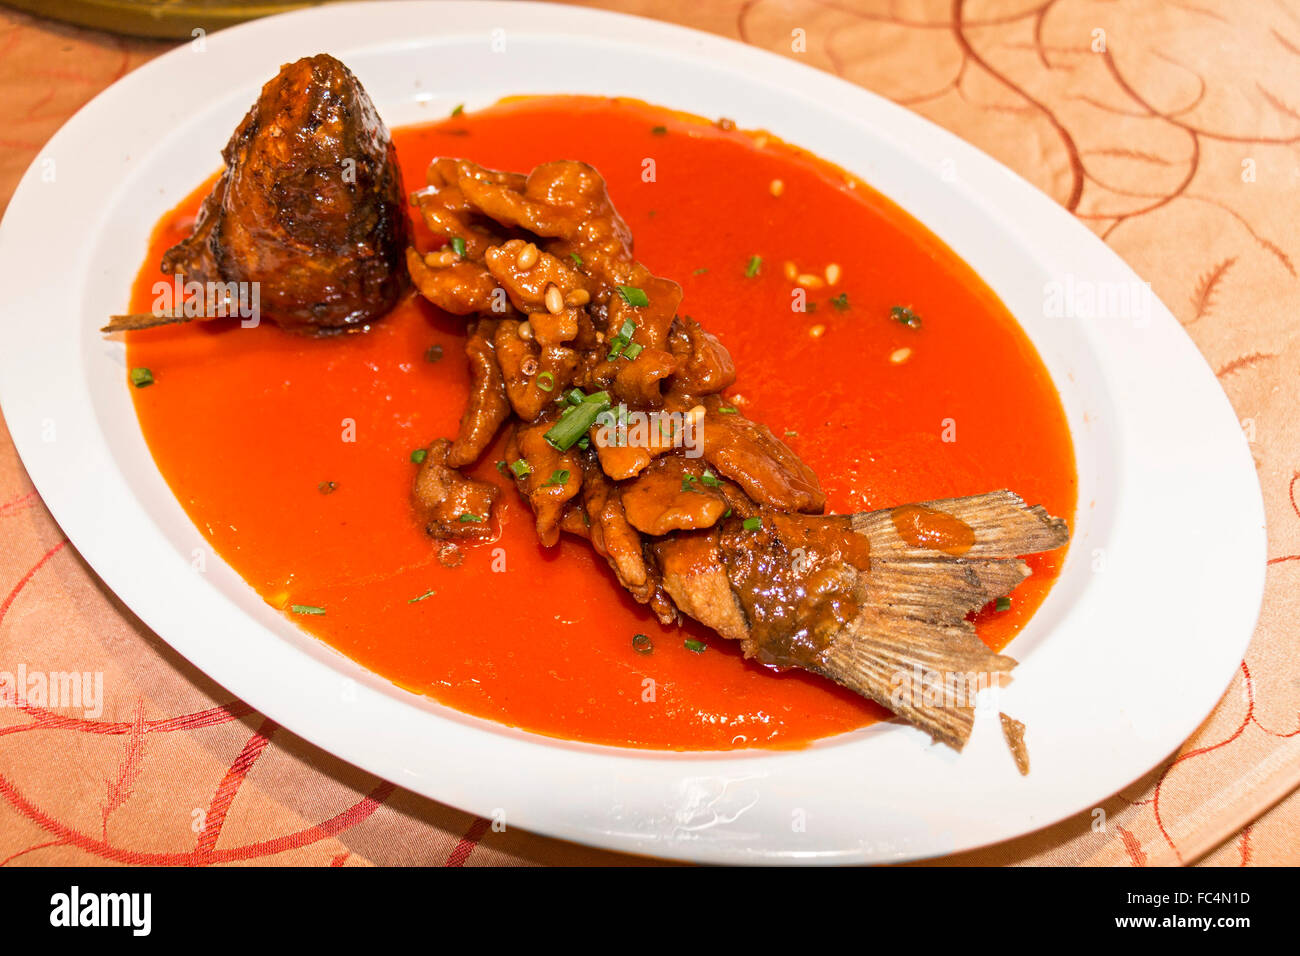 West Lake carp (a kind of white fish) in a sweet and sour red sauce. Served as part of a Chinese meal. Stock Photo